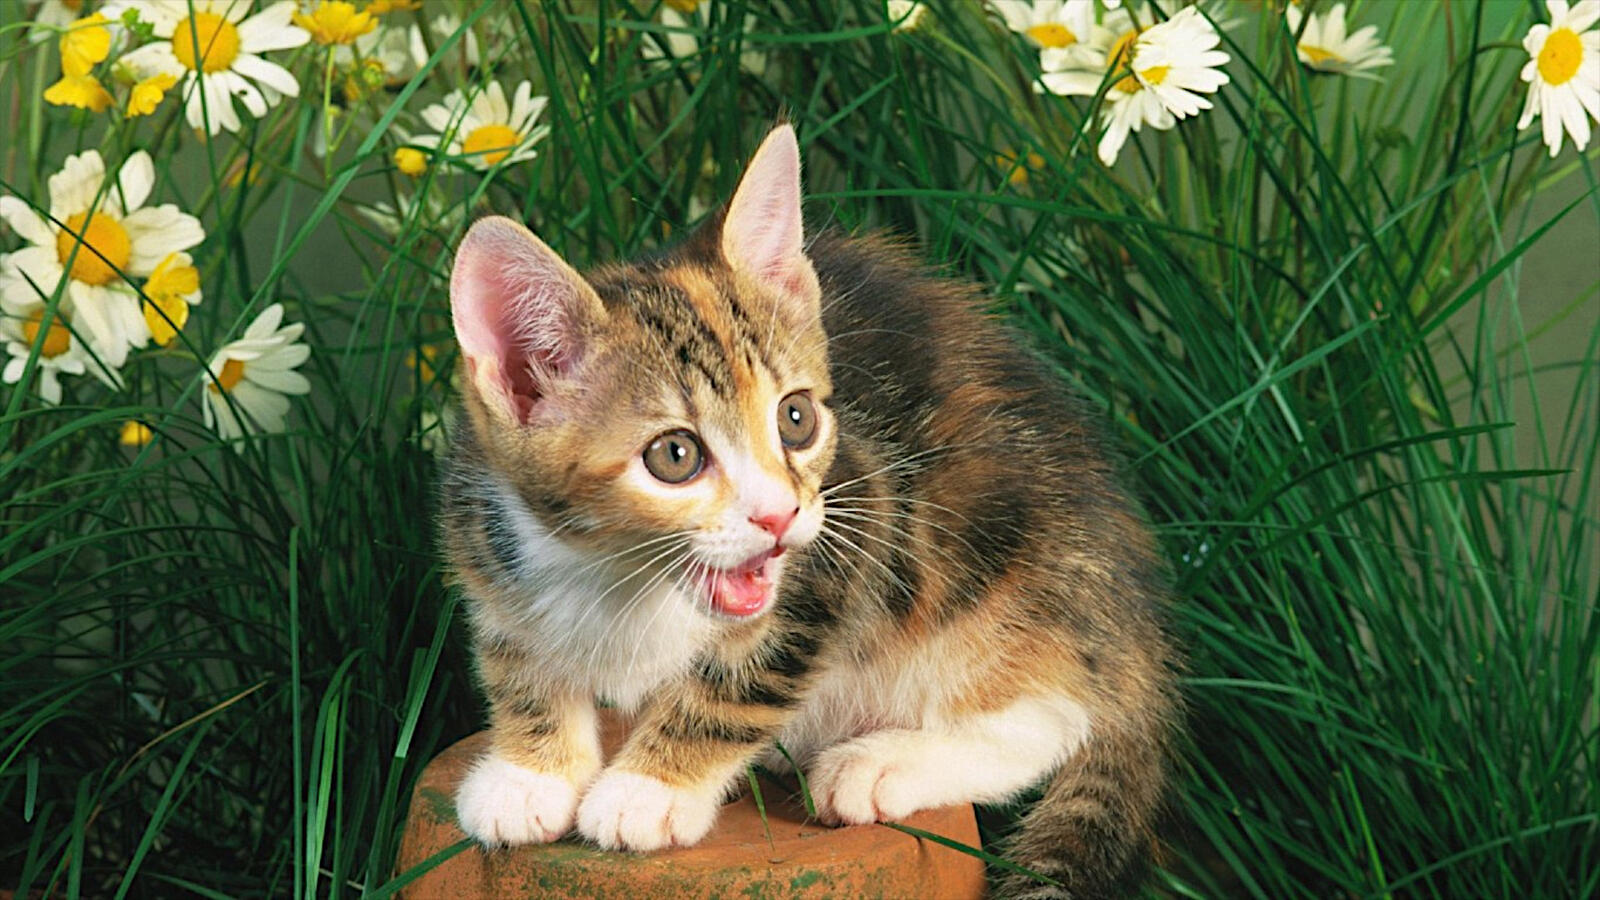 Free photo A little kitten among the green grass with daisies